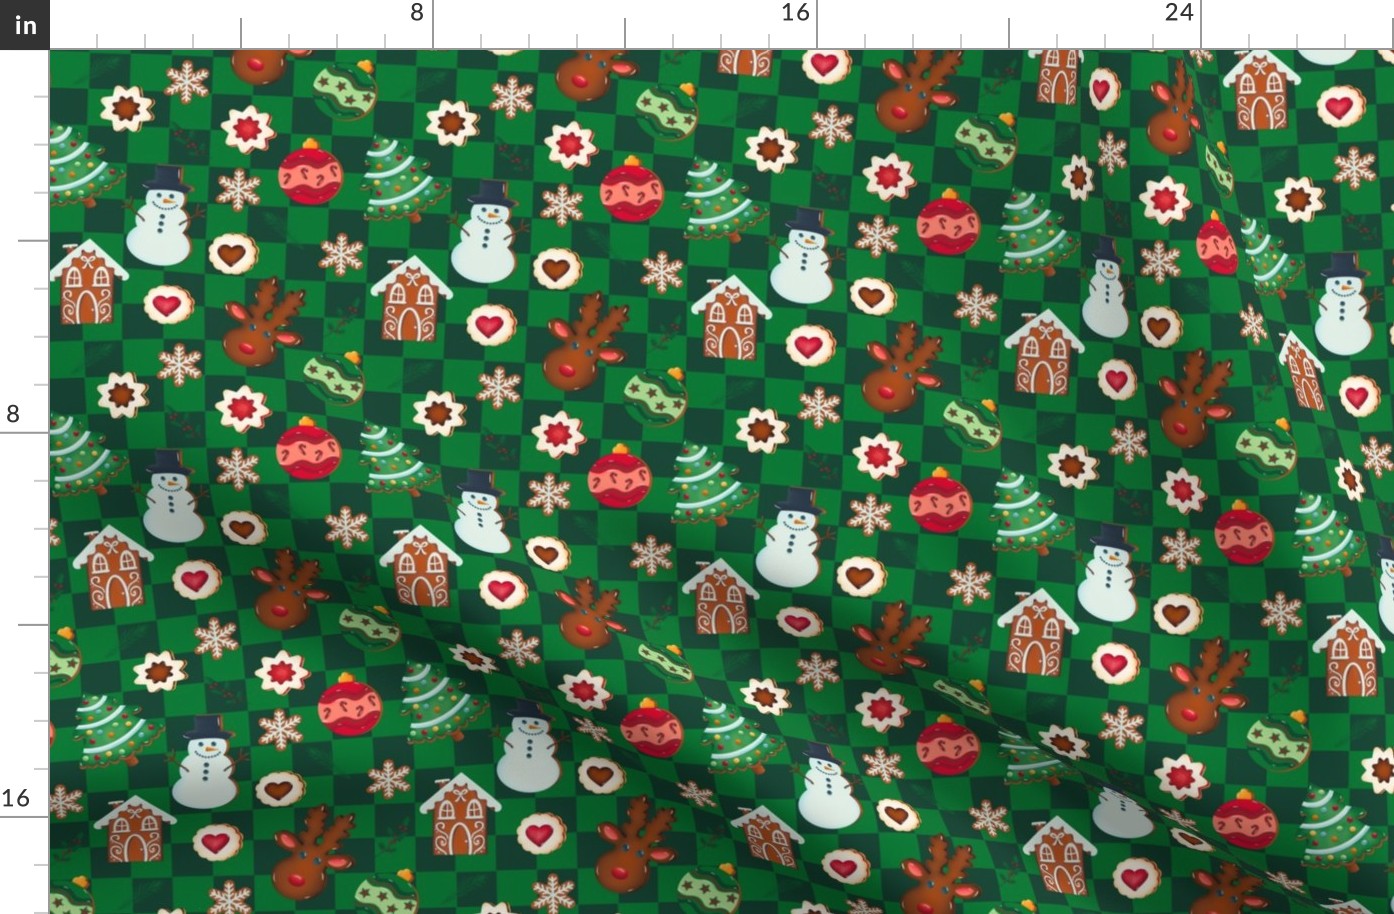 Gingerbread Cookie Bake in Holly Jolly Green - 6 inches - - Kawaii Christmas Kidcore Print